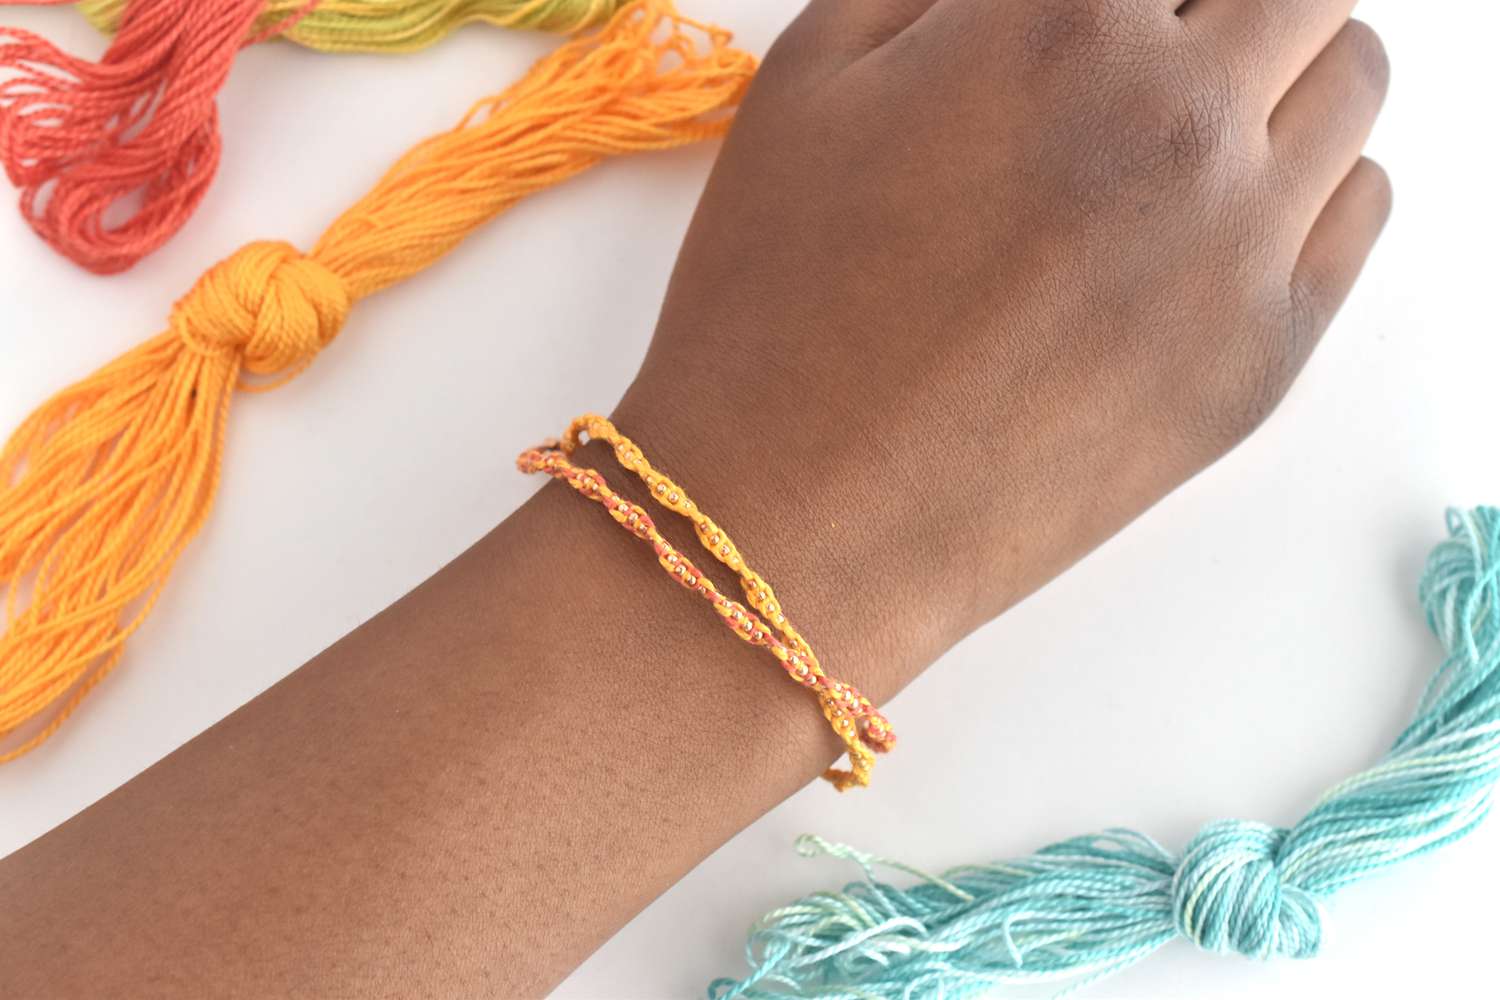 How to Make Knotted Chain Friendship Bracelets